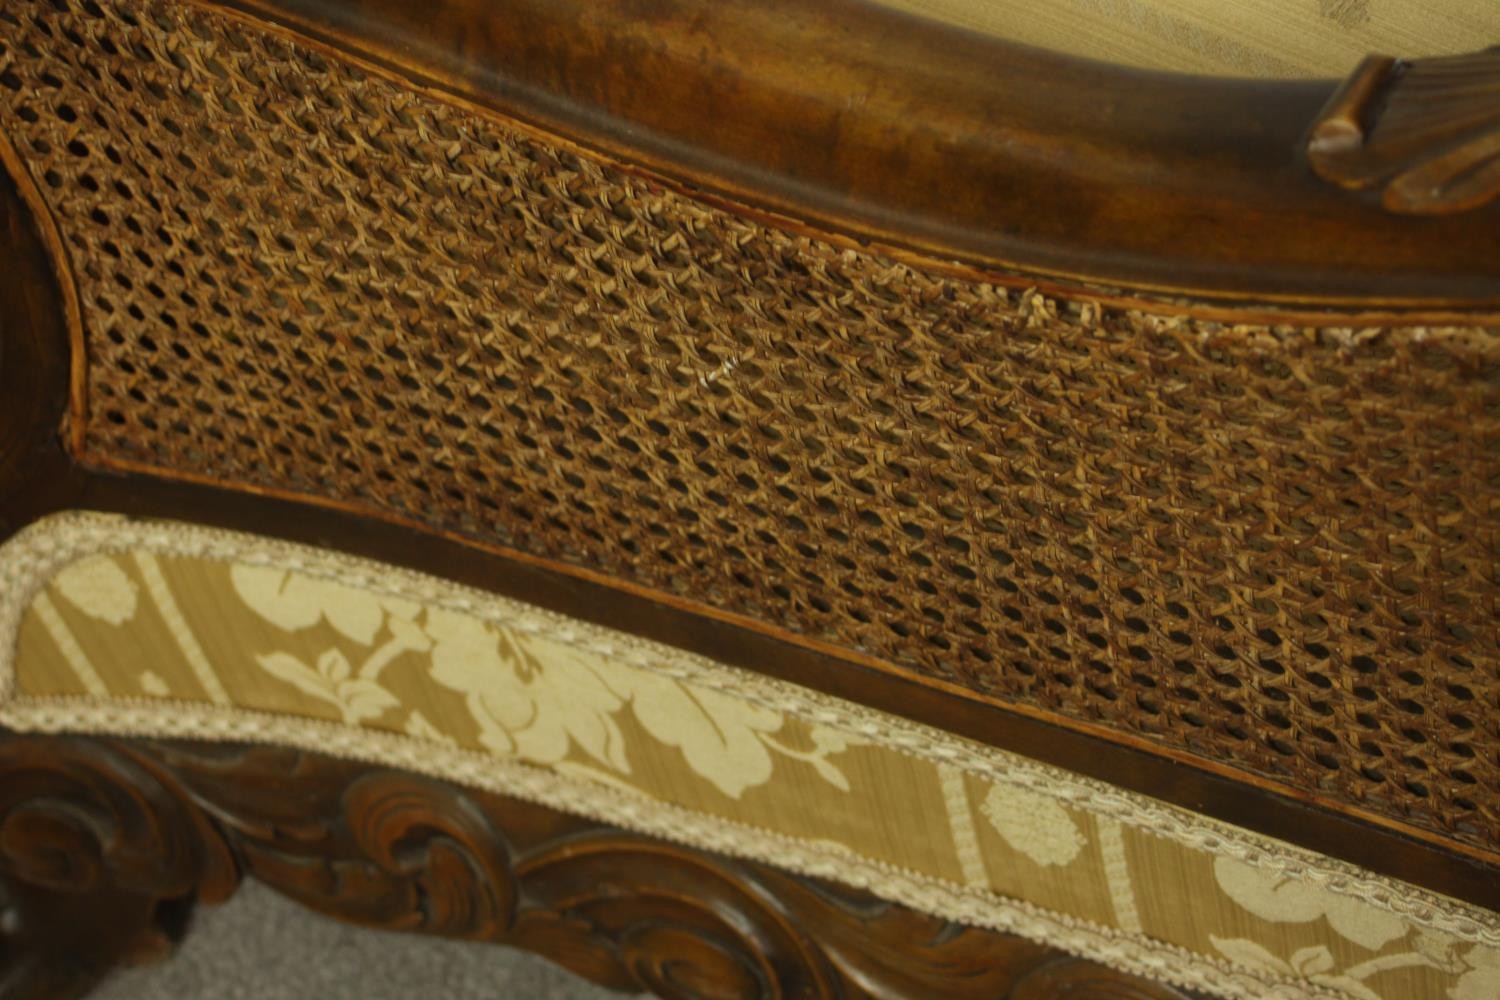 An early 20th century Continental carved walnut three seater bergere sofa, upholstered in gold - Image 18 of 18